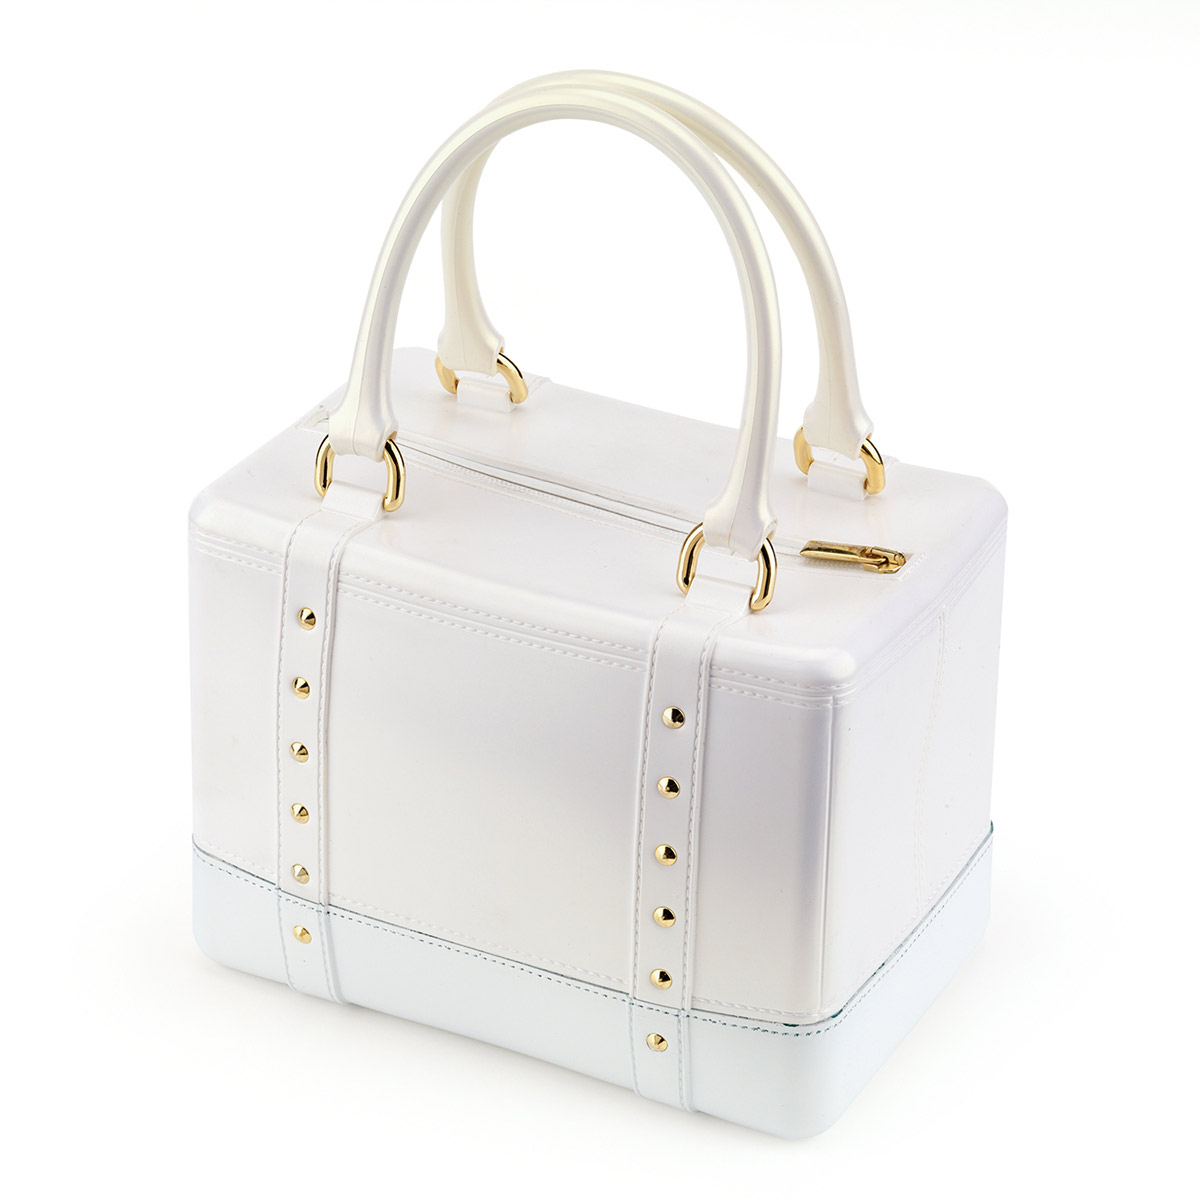 Pvc bag with gold colored studs